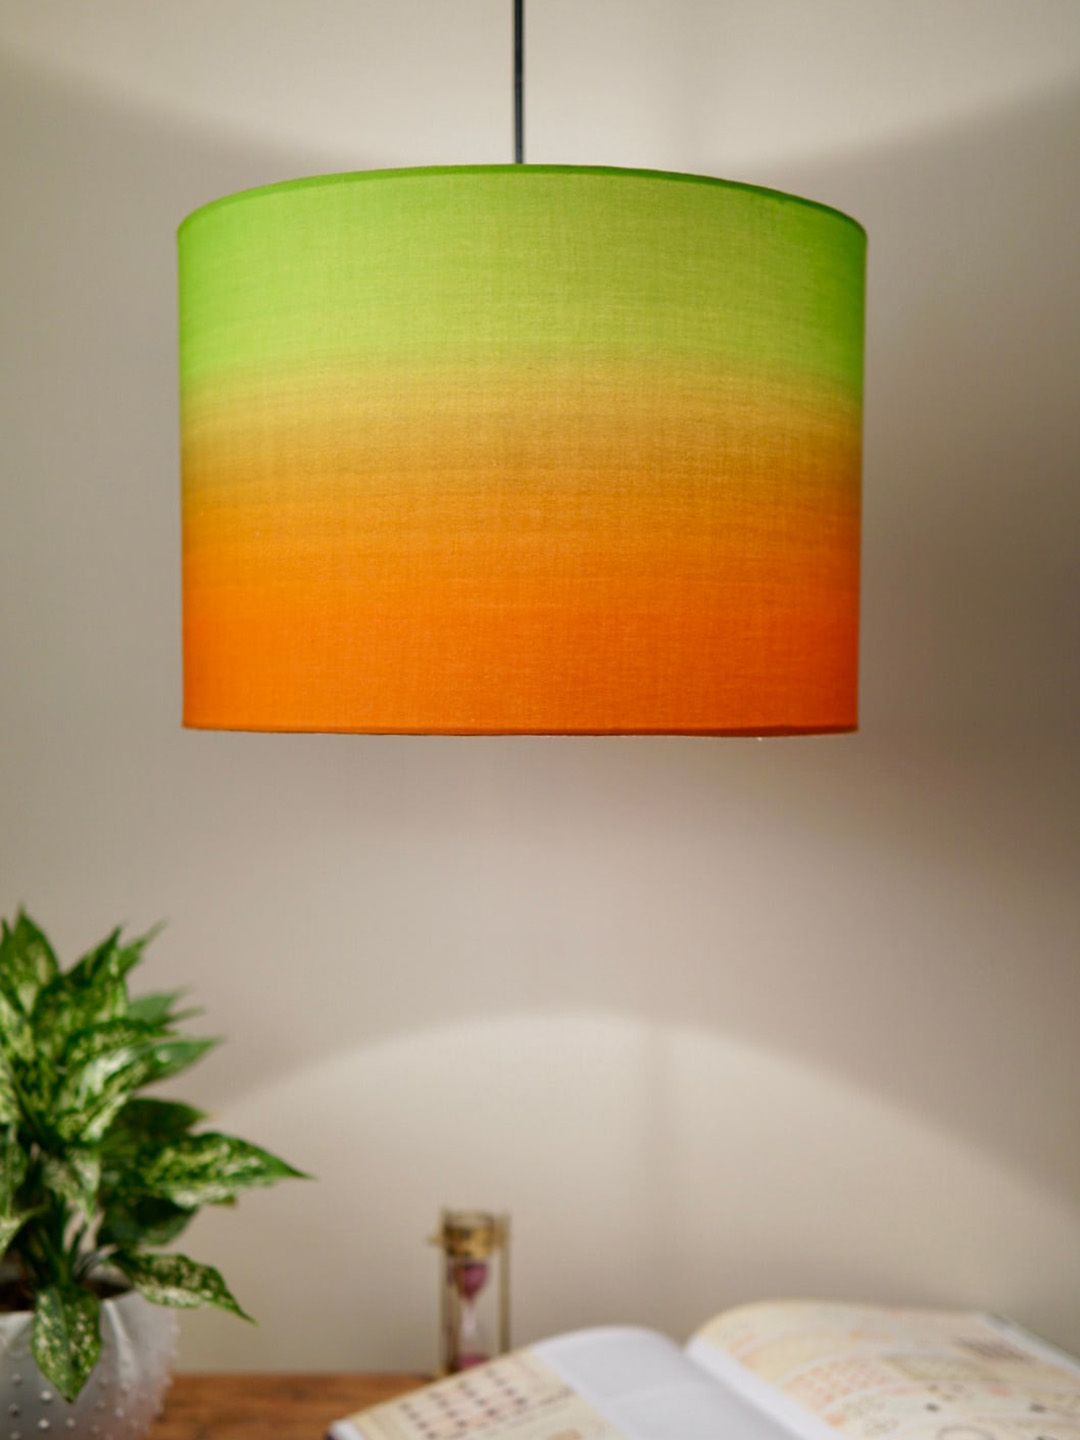 Grated Ginger Orange & Green Printed Cotton Ceiling Lamp Price in India